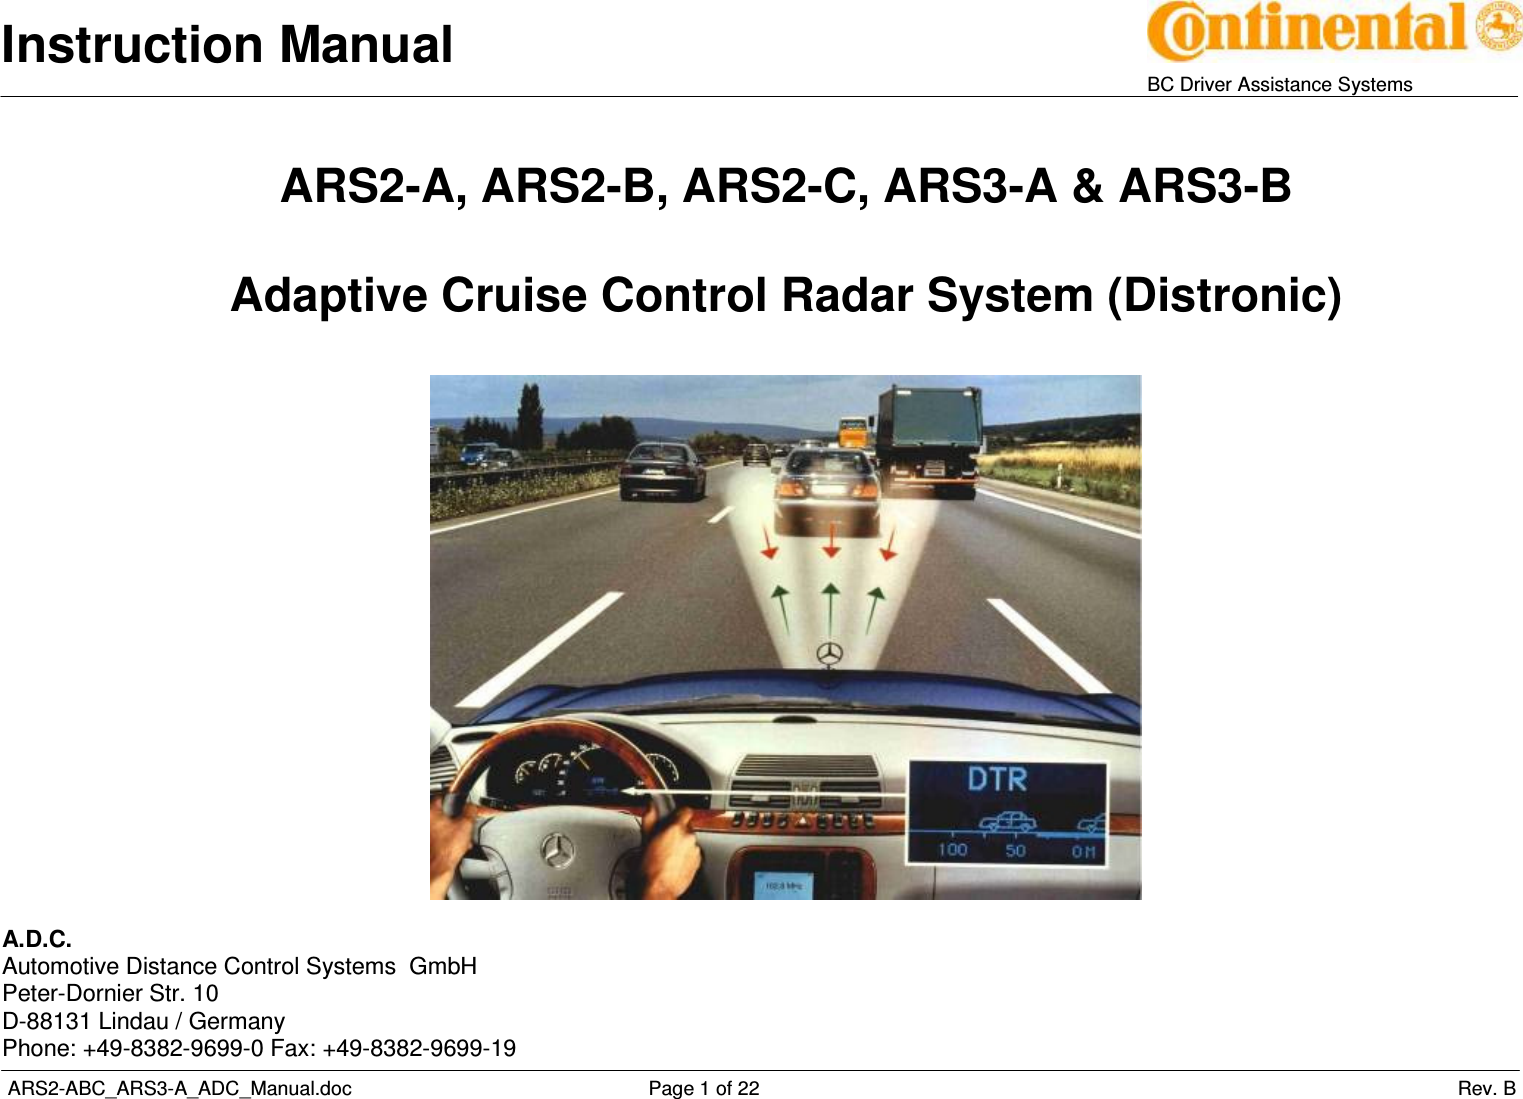 Instruction Manual   BC Driver Assistance Systems  ARS2-ABC_ARS3-A_ADC_Manual.doc     Page 1 of 22                 Rev. B ARS2-A, ARS2-B, ARS2-C, ARS3-A &amp; ARS3-B  Adaptive Cruise Control Radar System (Distronic)     A.D.C. Automotive Distance Control Systems  GmbH Peter-Dornier Str. 10 D-88131 Lindau / Germany Phone: +49-8382-9699-0 Fax: +49-8382-9699-19 